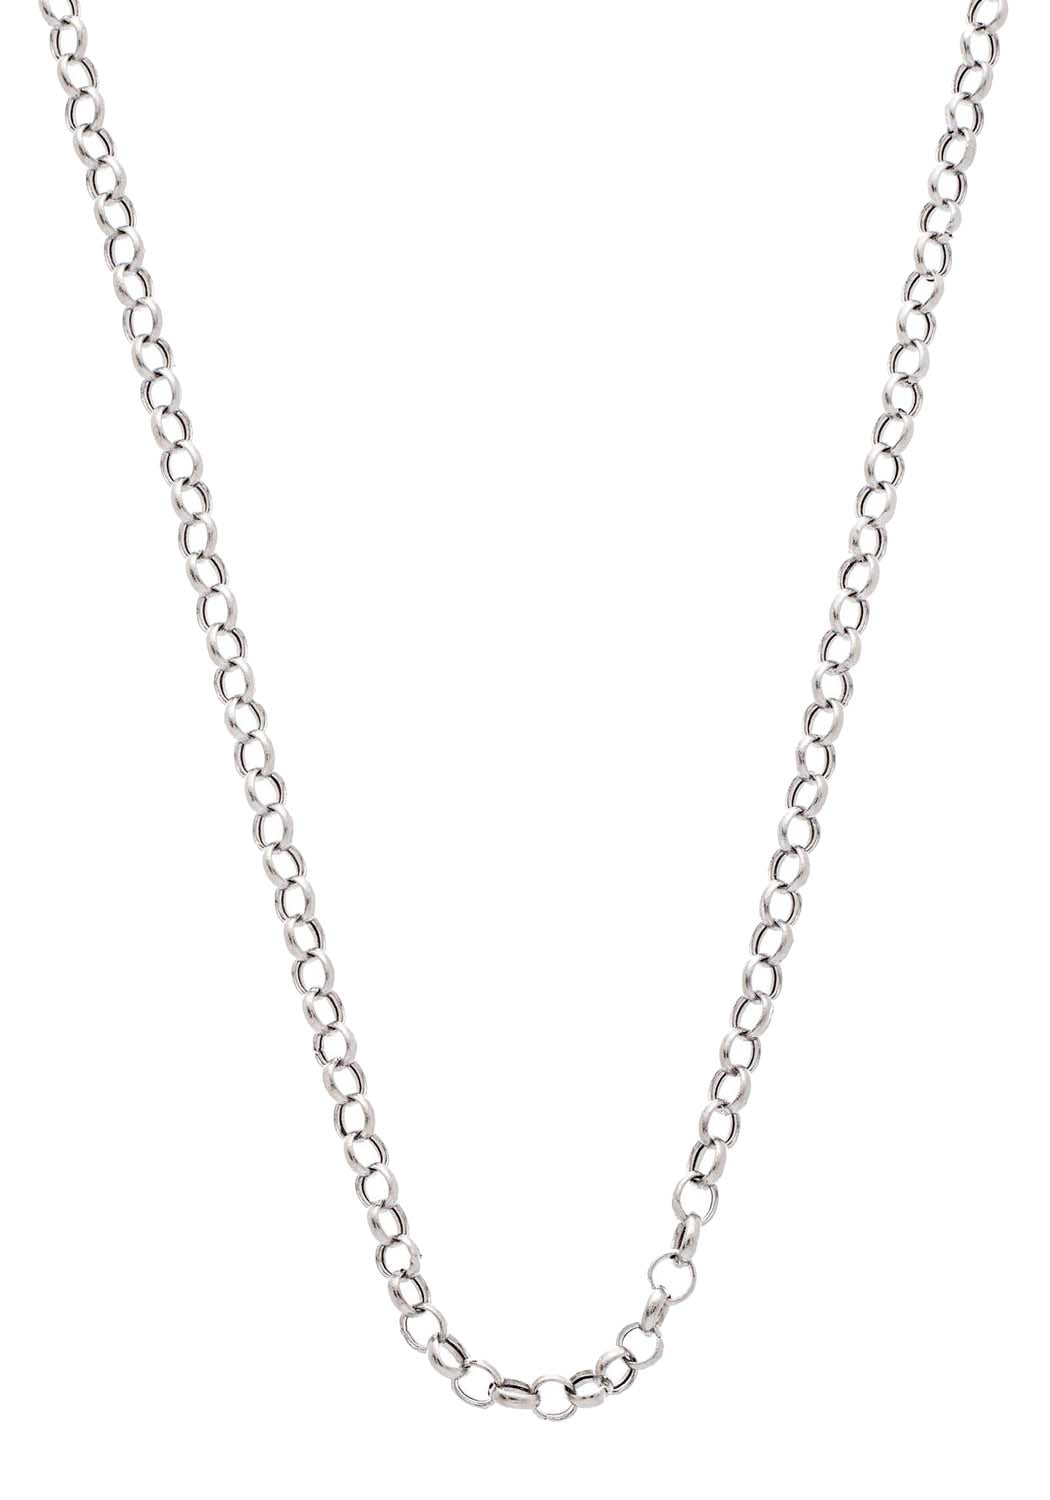 Sethi Couture 18K White Gold Rolo Chain Necklace | Ref. GC-WGRL-20 | OsterJewelers.com